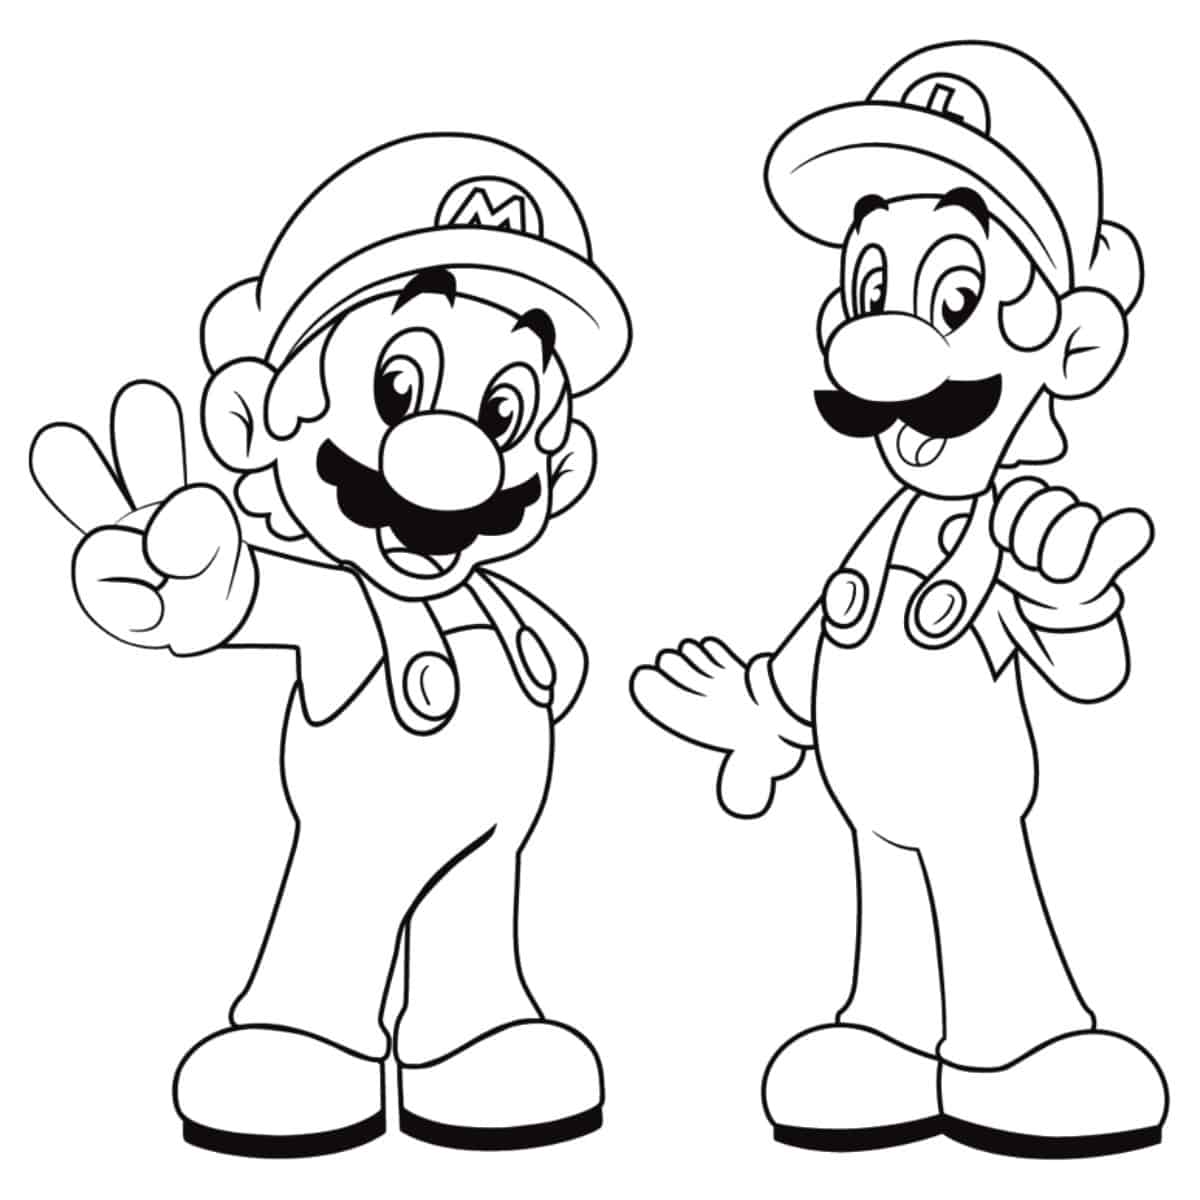 Free mario coloring pages